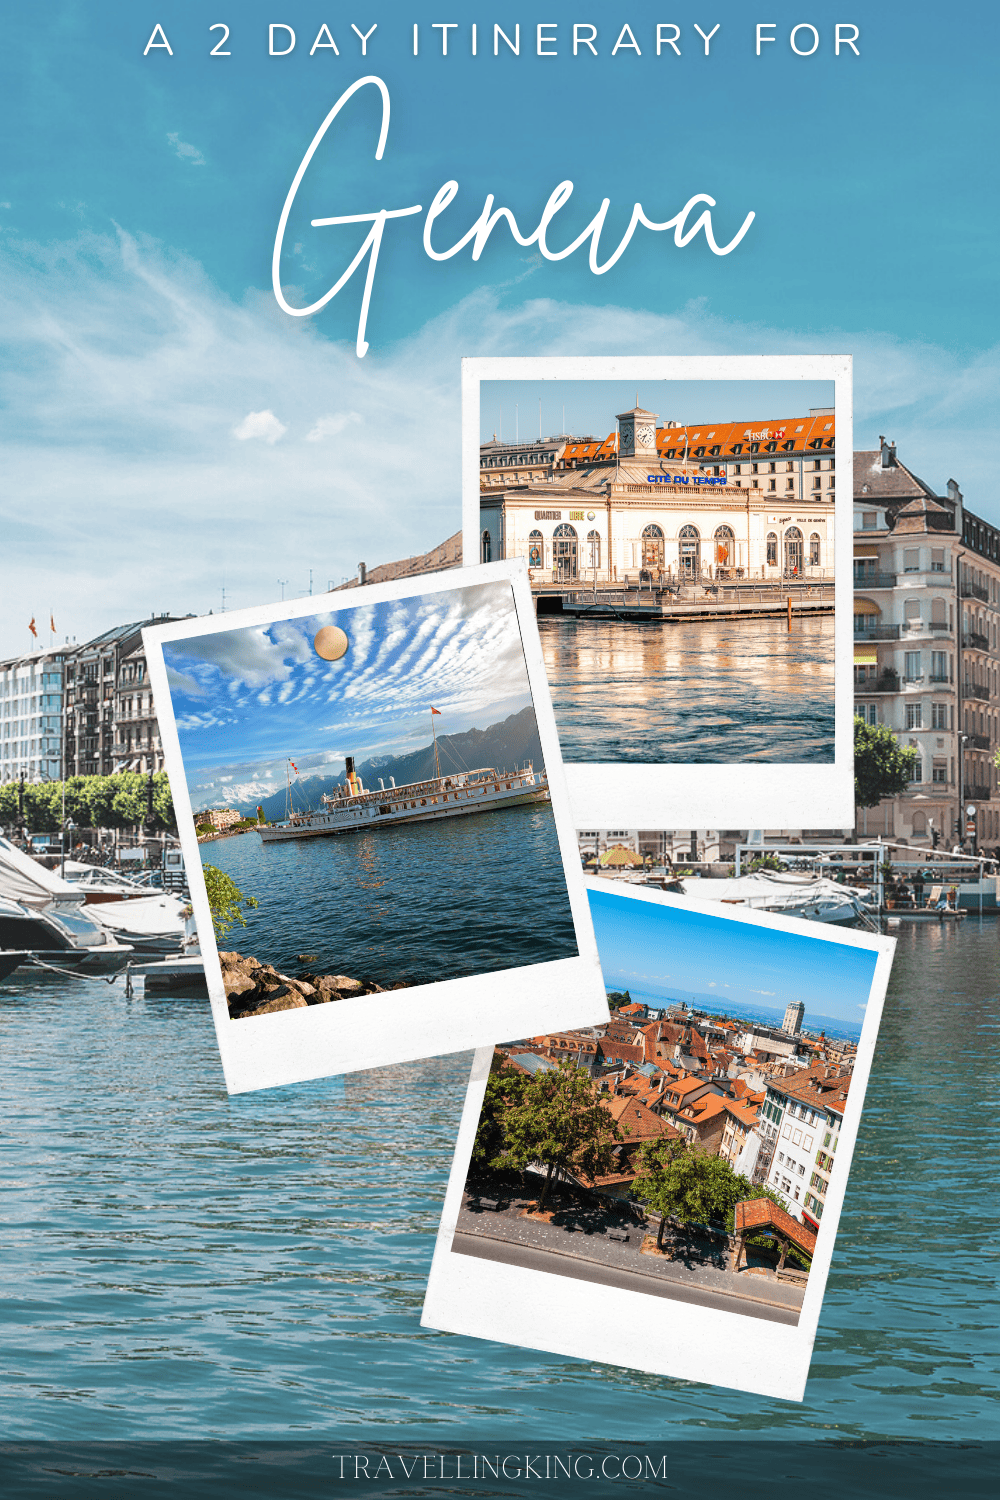 48 hours in Geneva - A 2 day Itinerary